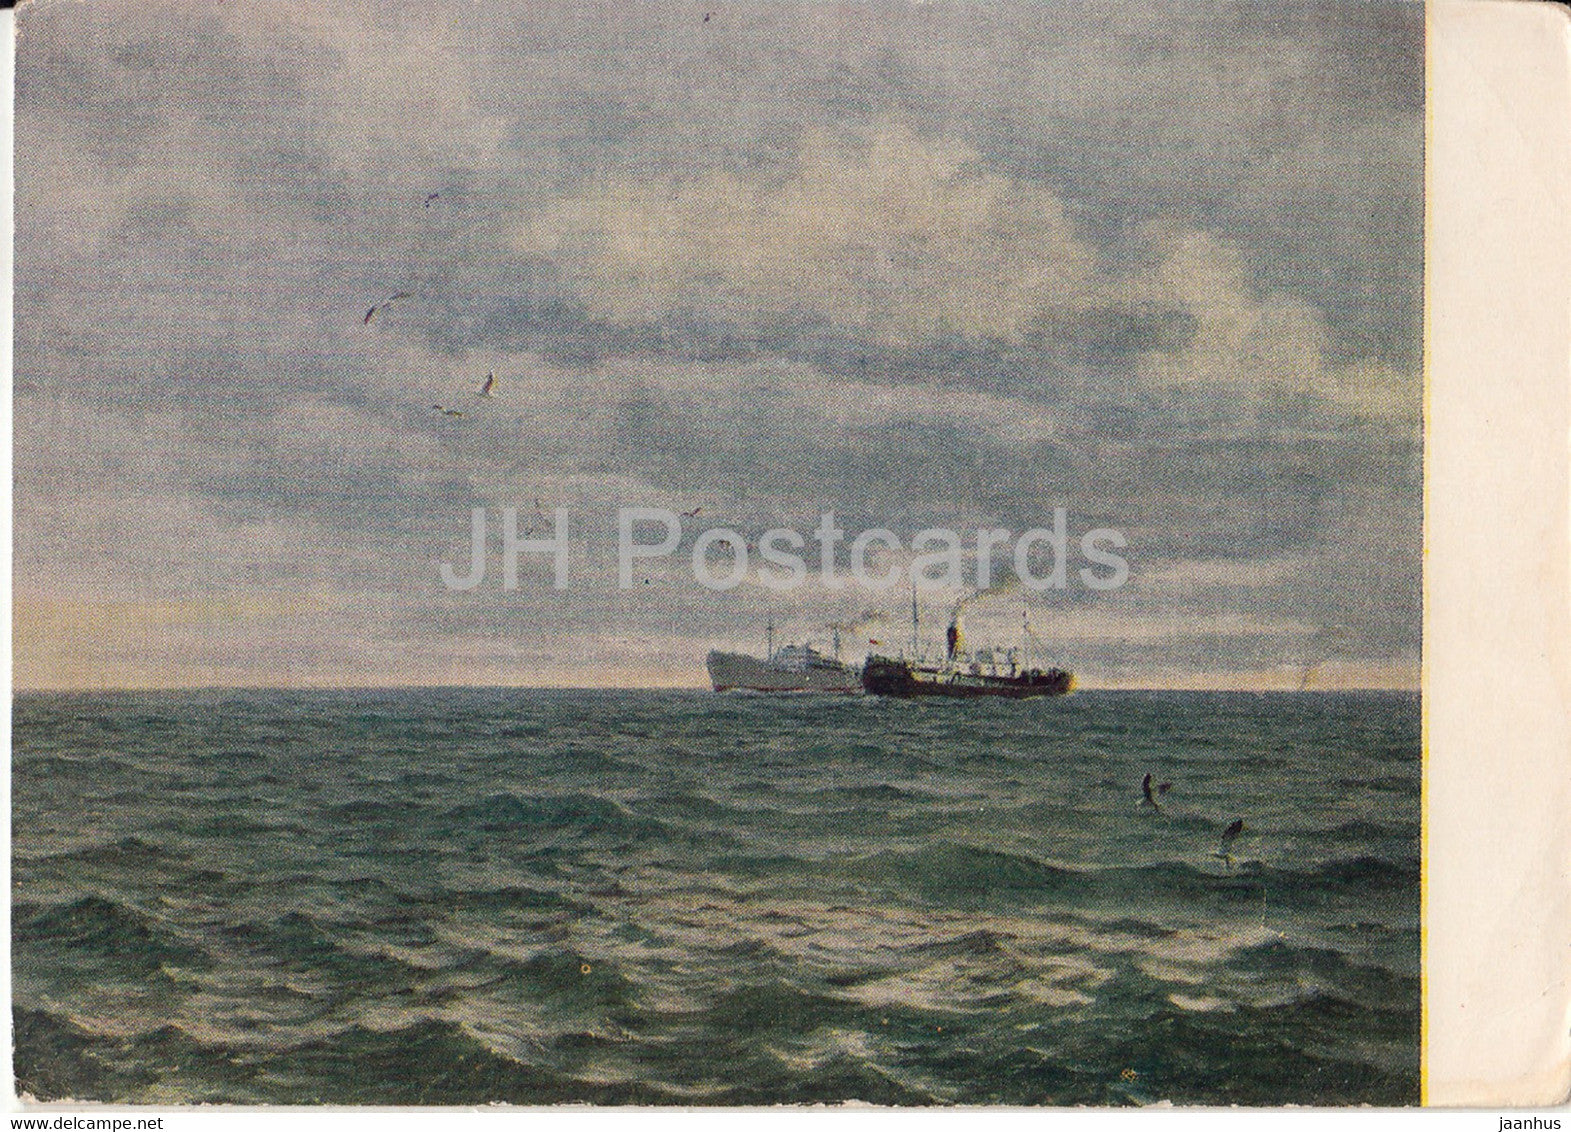 painting by L. Zhigalov - White Sea - ship - Russian art - 1956 - Russia USSR - unused - JH Postcards